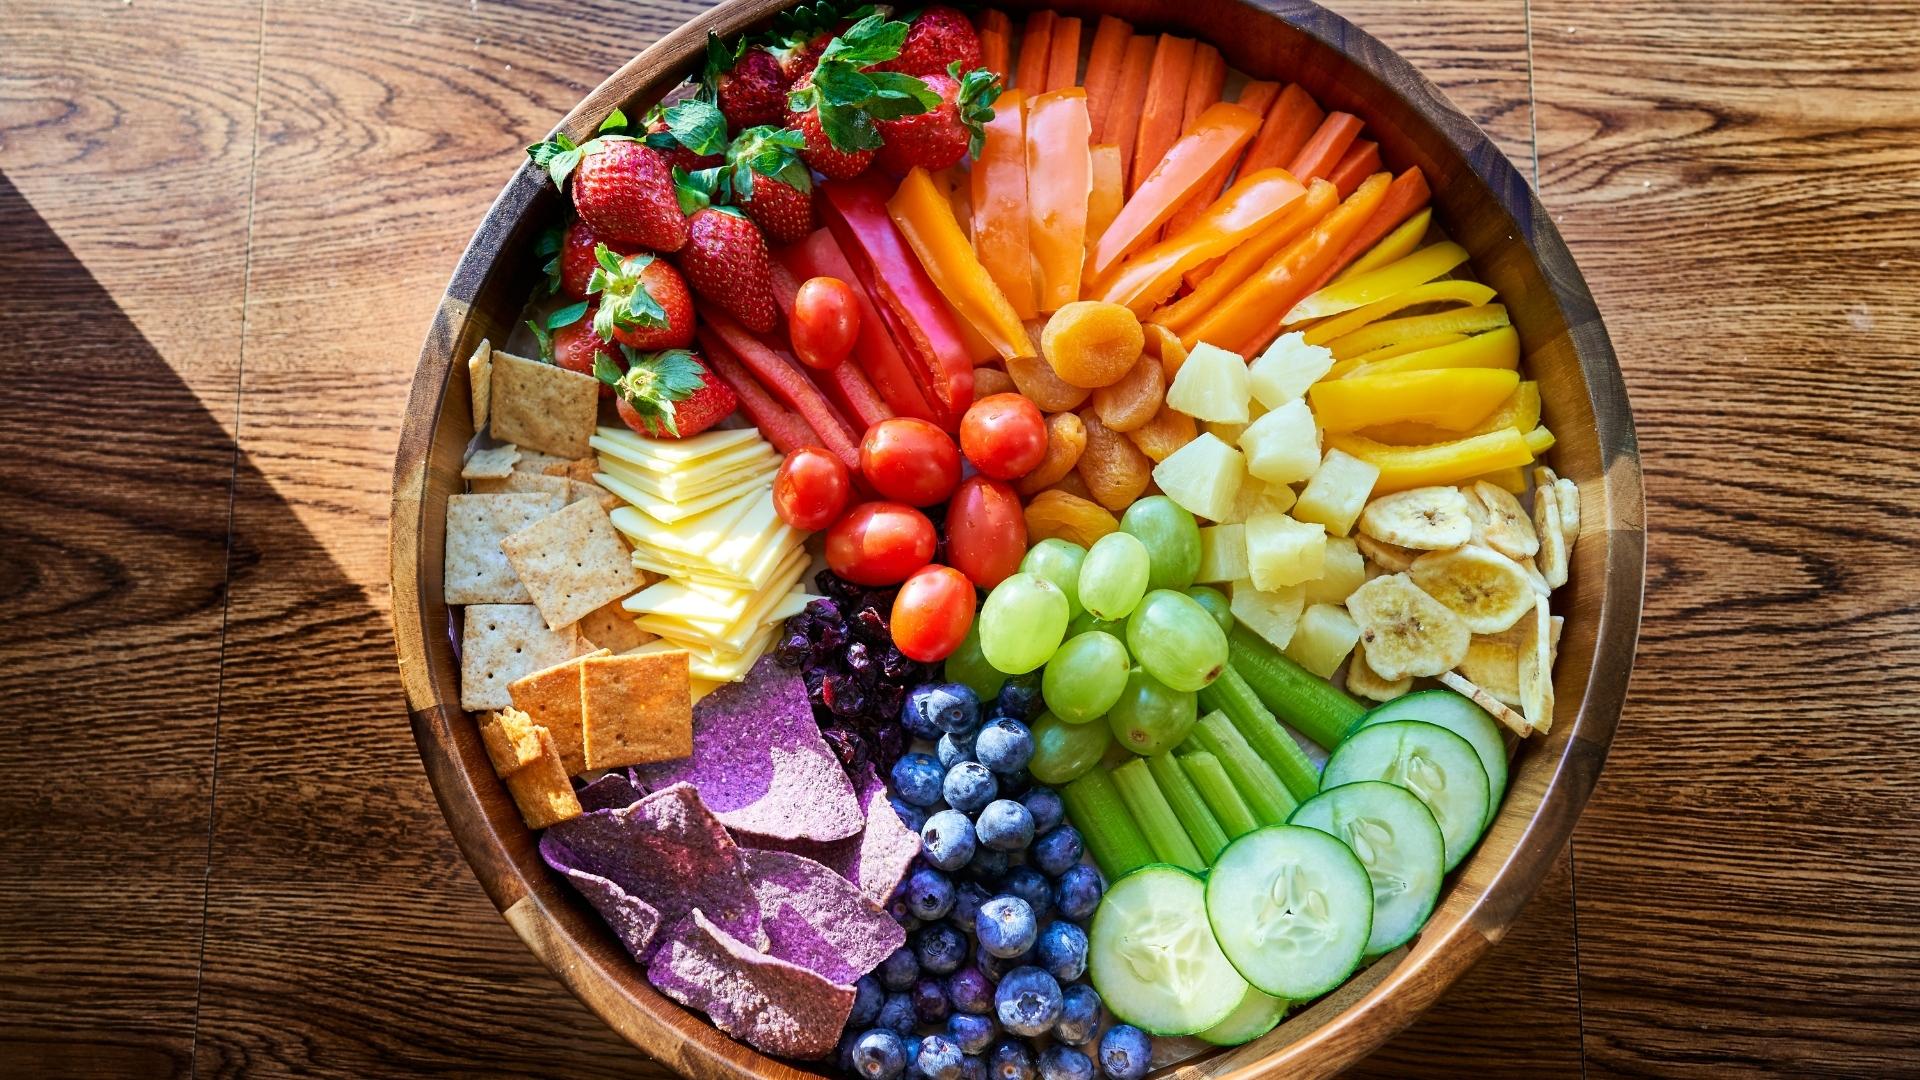 A wooden table with a large wooden bowl featuring fruit, vegetables, vegan cheese, and crackers.